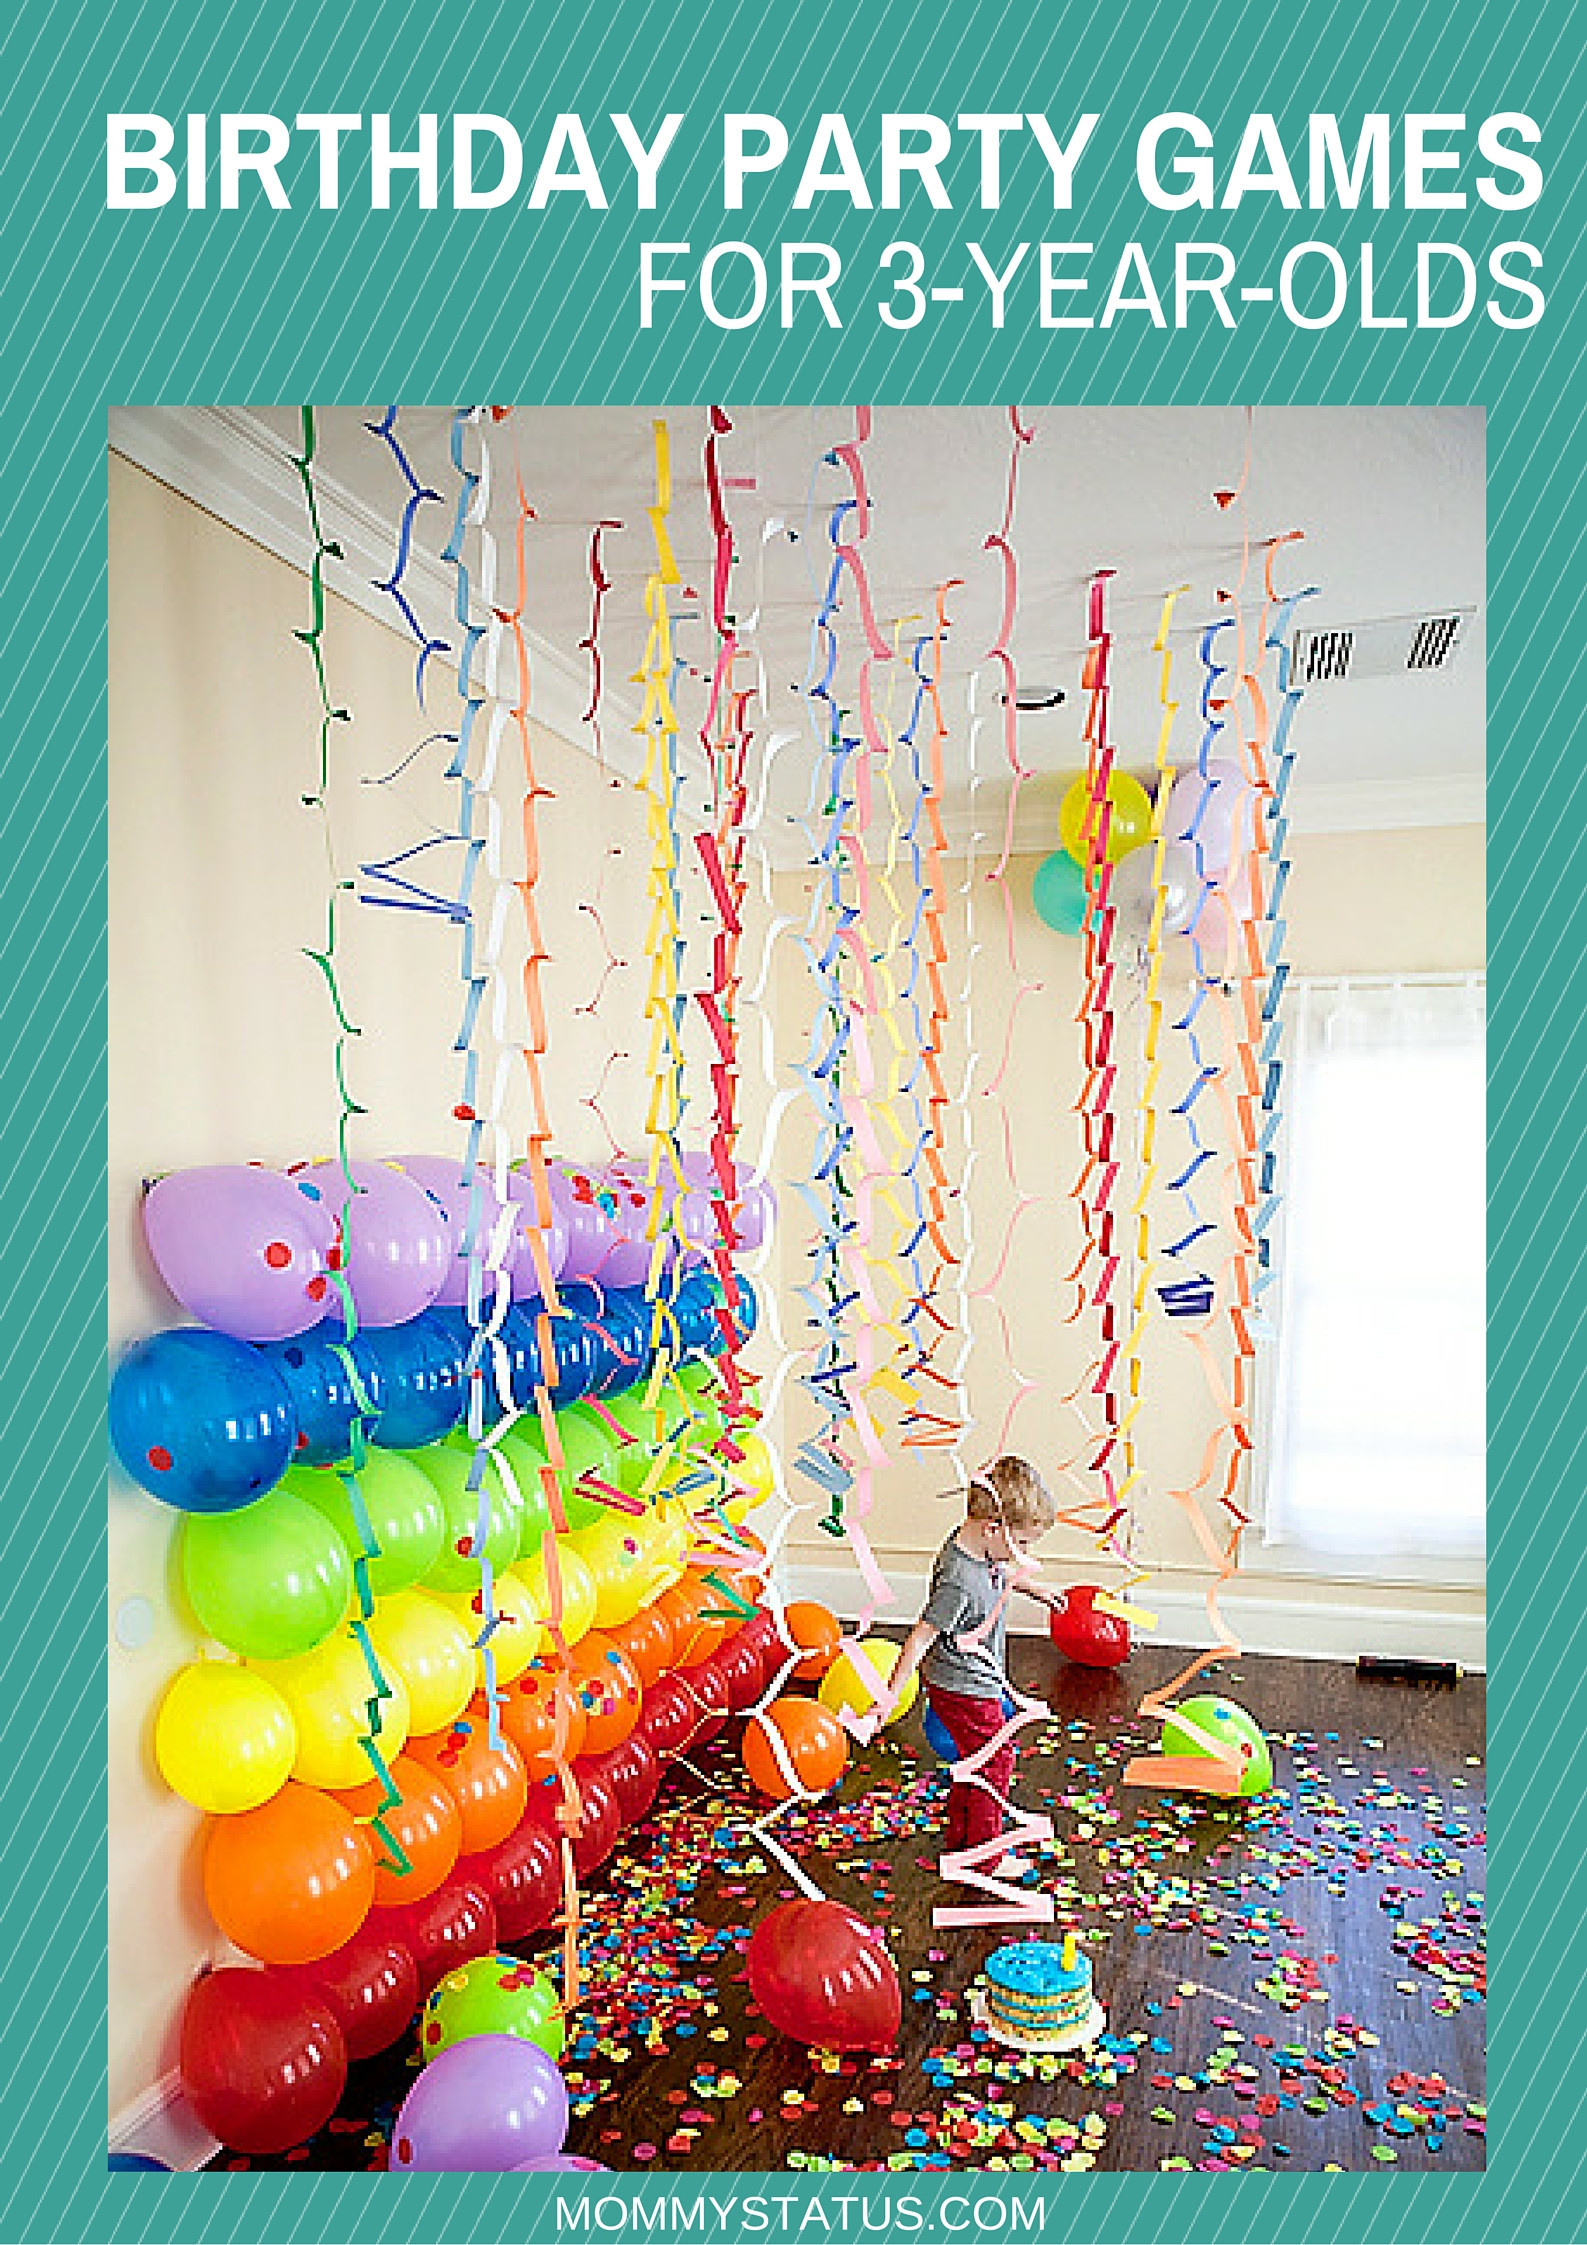 Games For Boys Birthday Party
 BIRTHDAY PARTY GAMES FOR 3 YEAR OLDS Mommy Status